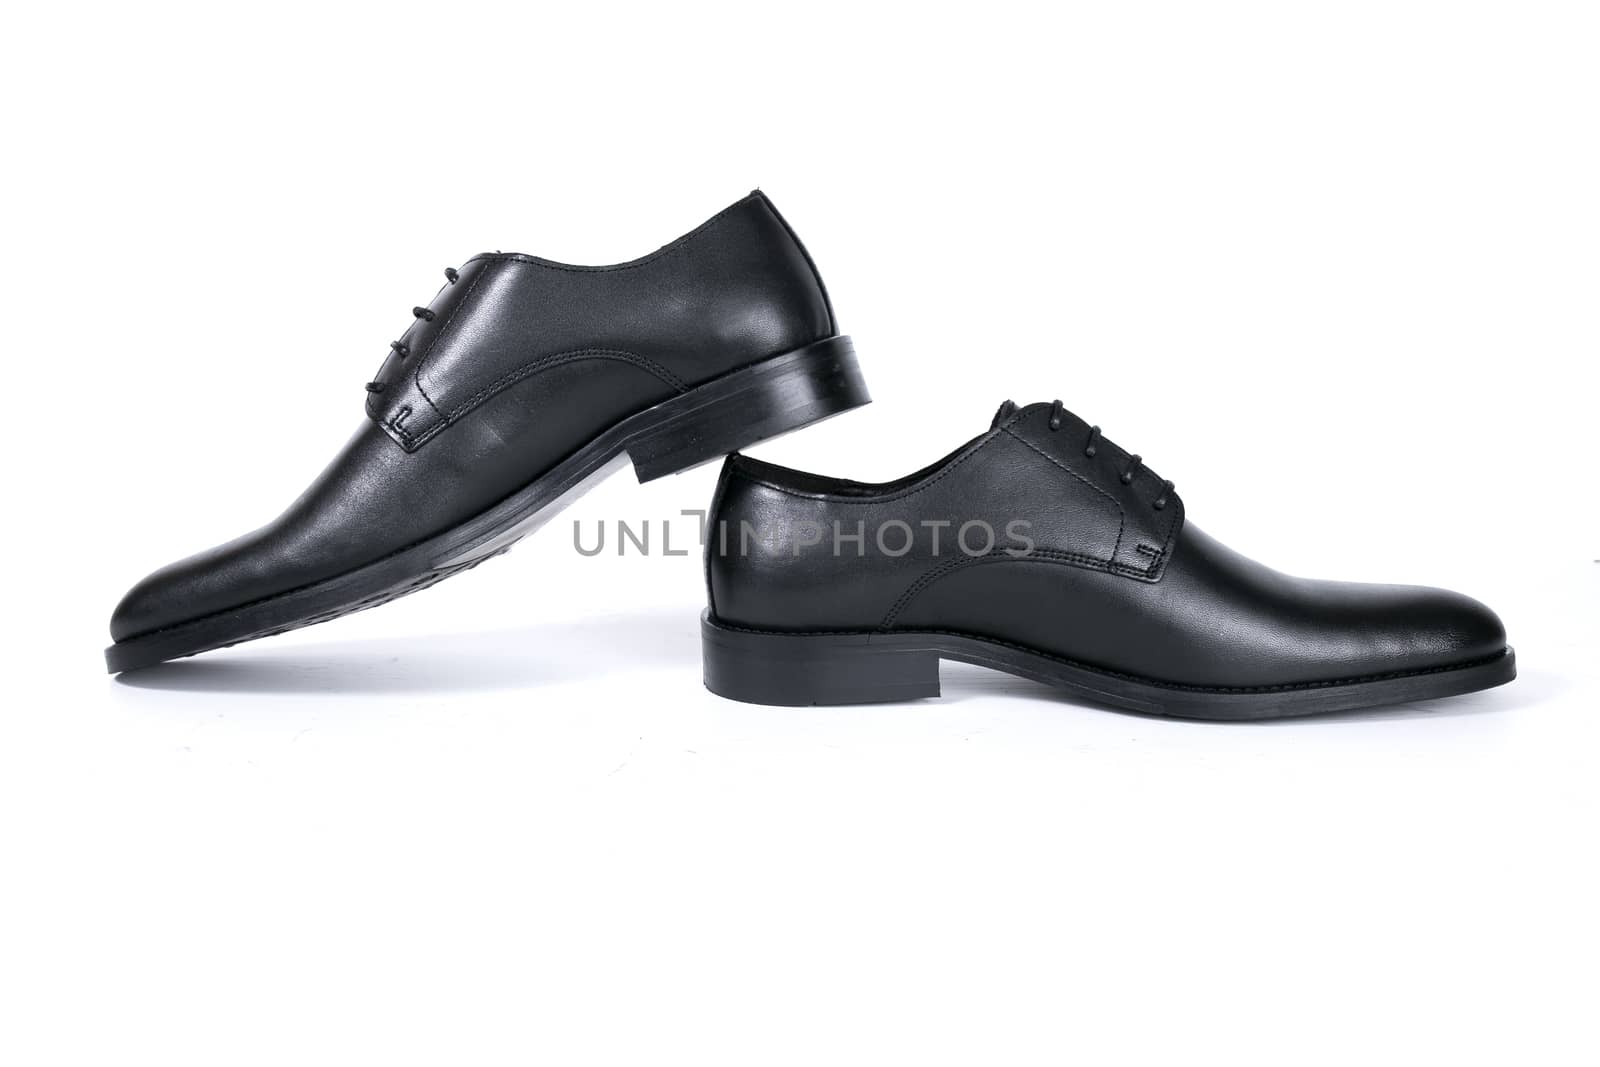 Pair of black shoes on white background, isolated product.